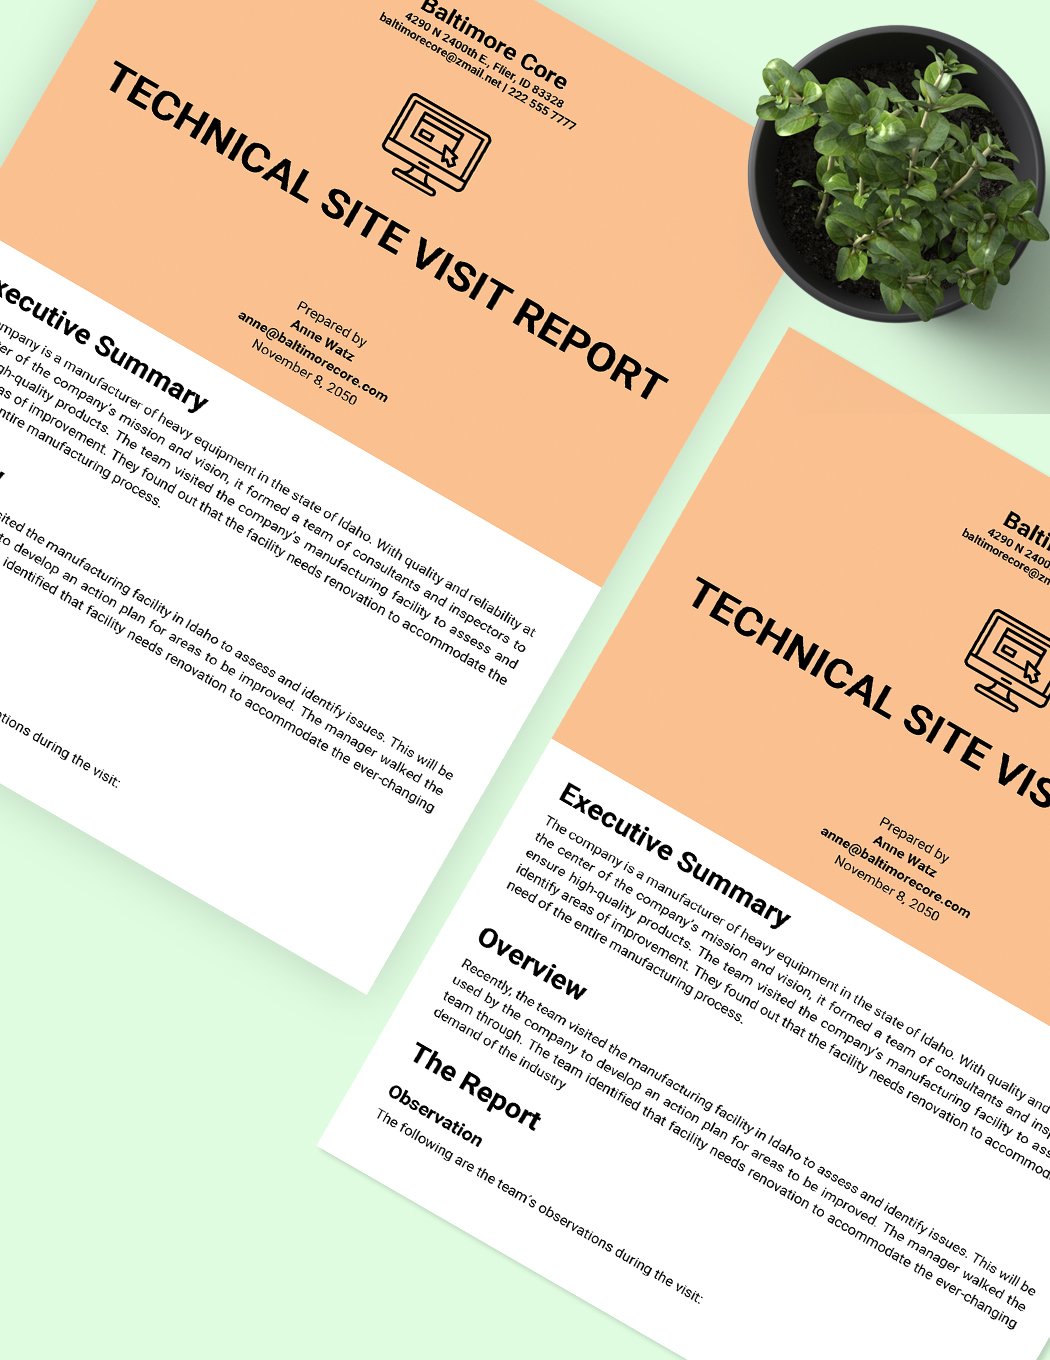 Technical Site Visit Report Template